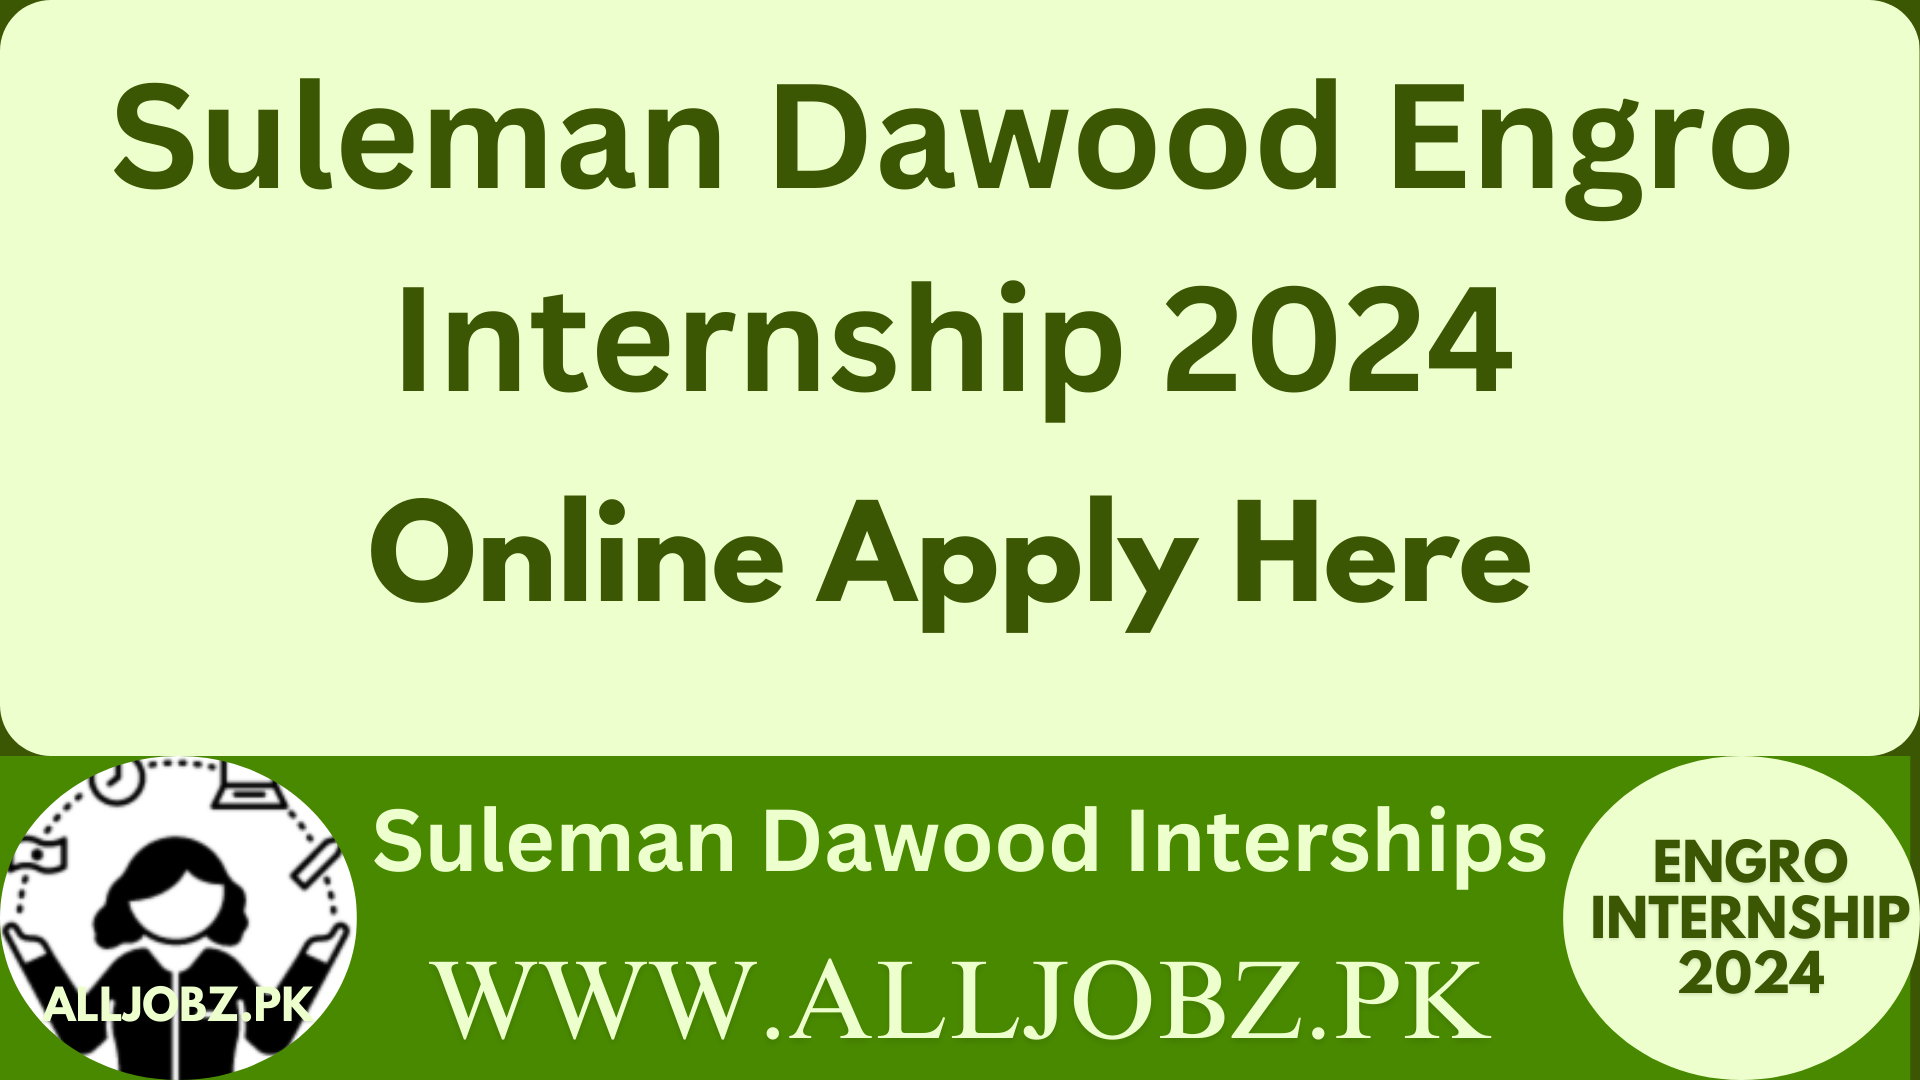 Launch Your Career At Suleman Dawood Engro Internship 2024 Online Apply, Suleman Dawood Internship Pakistan, Suleman Dawood Internship 2024, Engineering Internship Pakistan, It Internship Pakistan, Corporate Internship Pakistan, Suleman Dawood Jobs Pakistan, Paid Internship Pakistan, Geology Internship Pakistan, Mining Internship Pakistan, Supply Chain Internship Pakistan